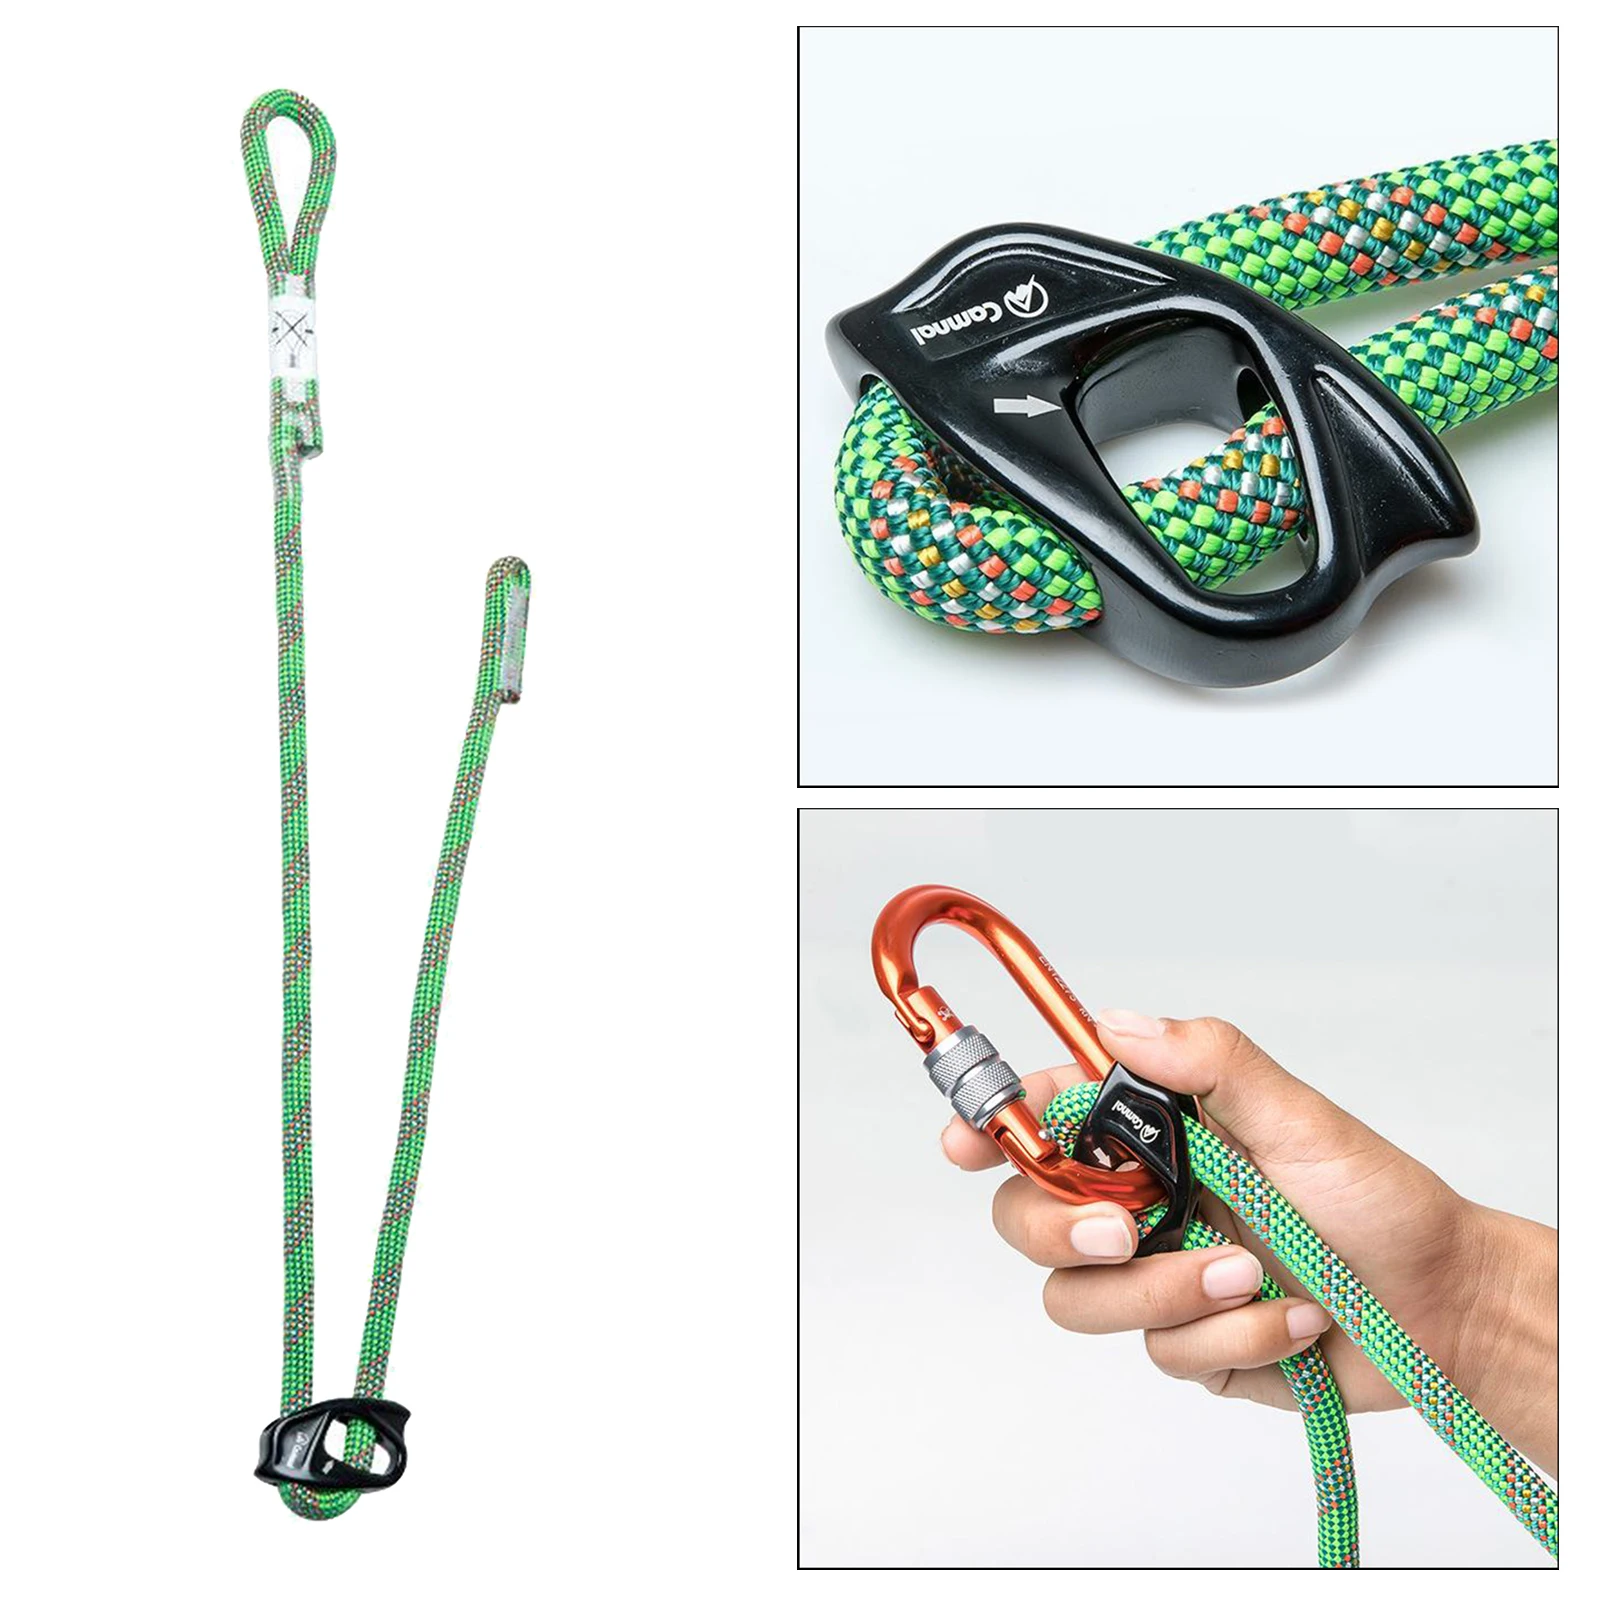 Positioning Lanyard Personal Protection Equipment Work Safety